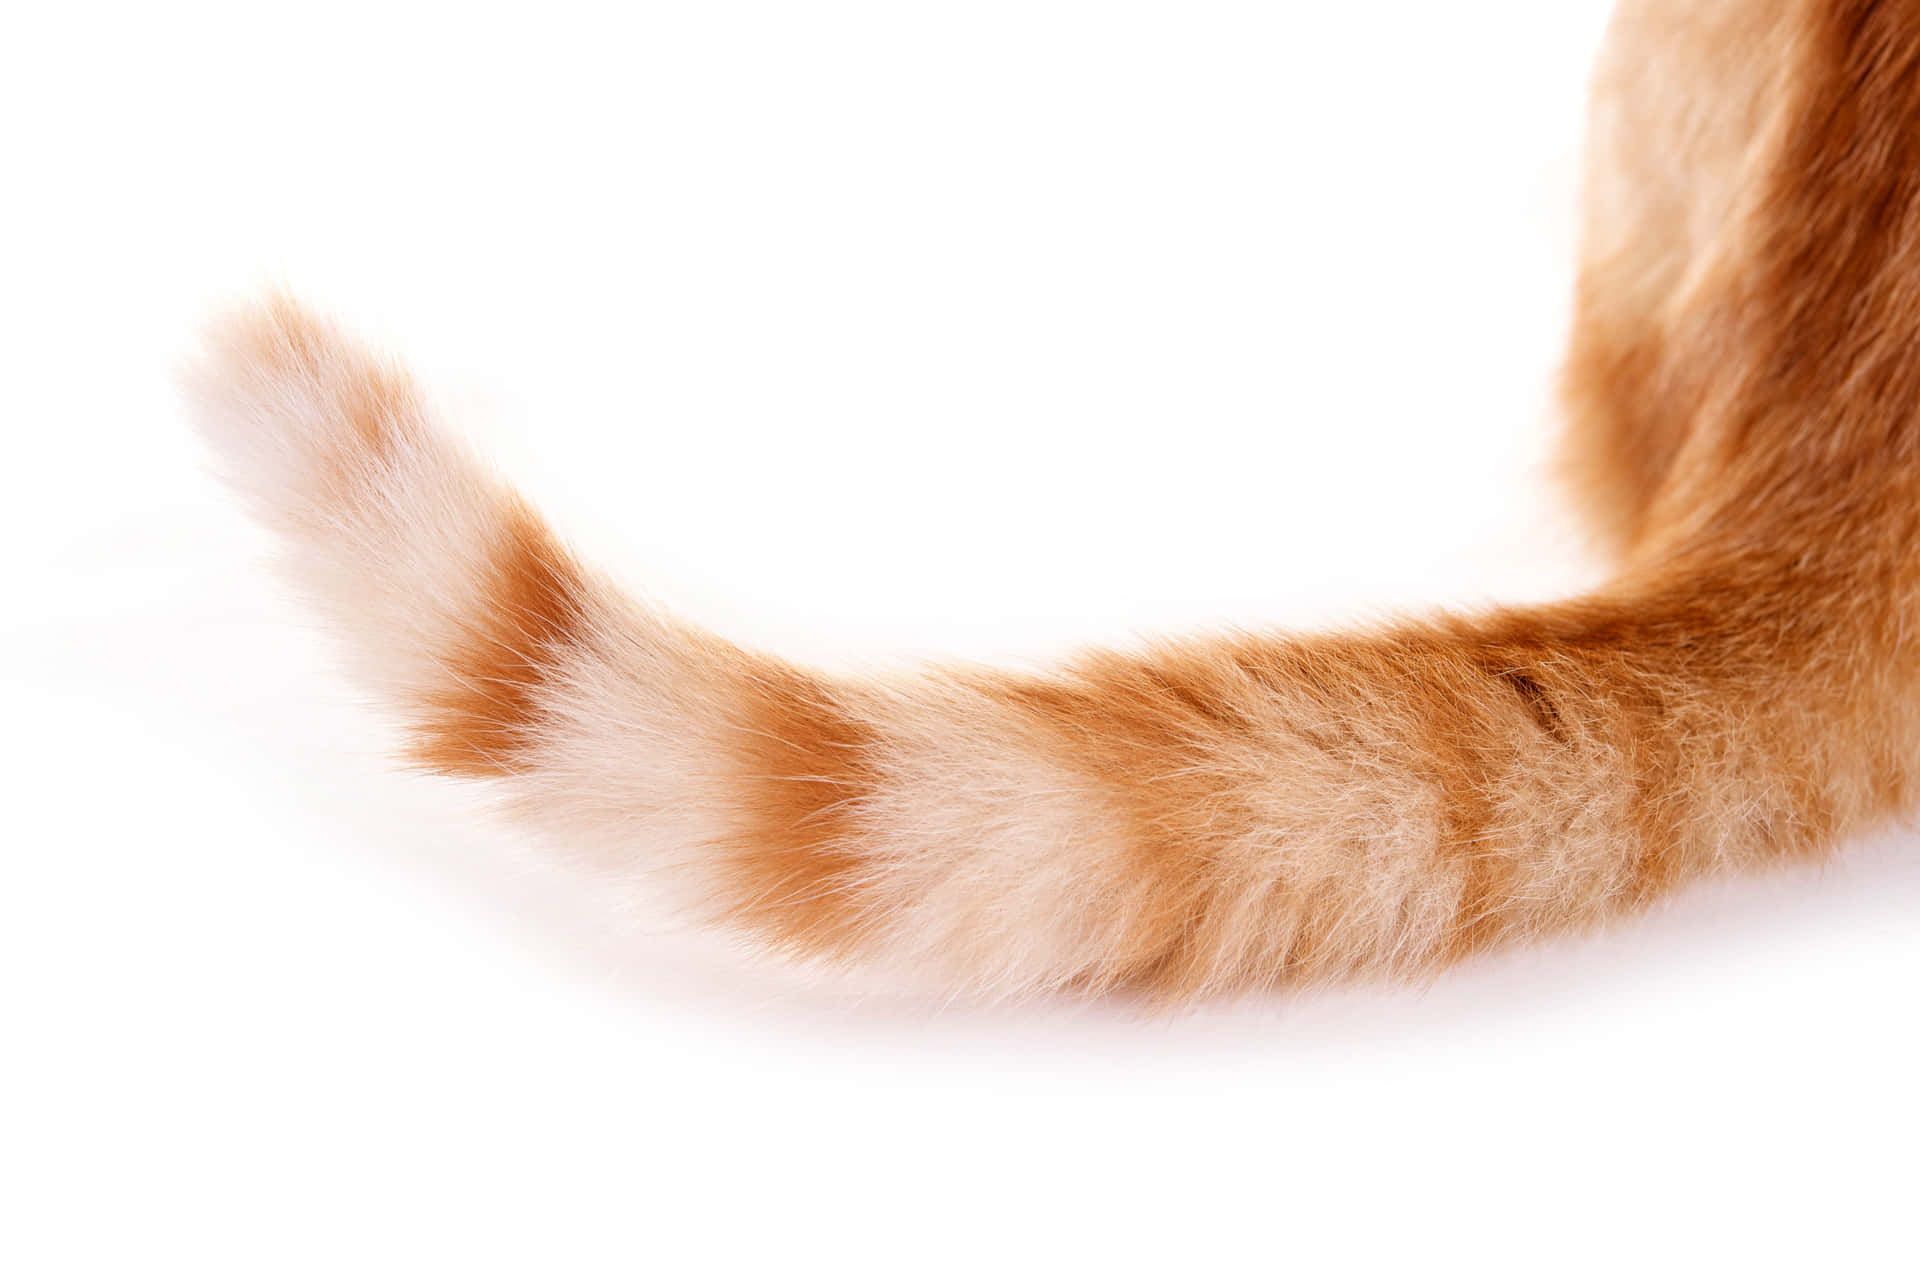 A Cat With A Tail On A White Background